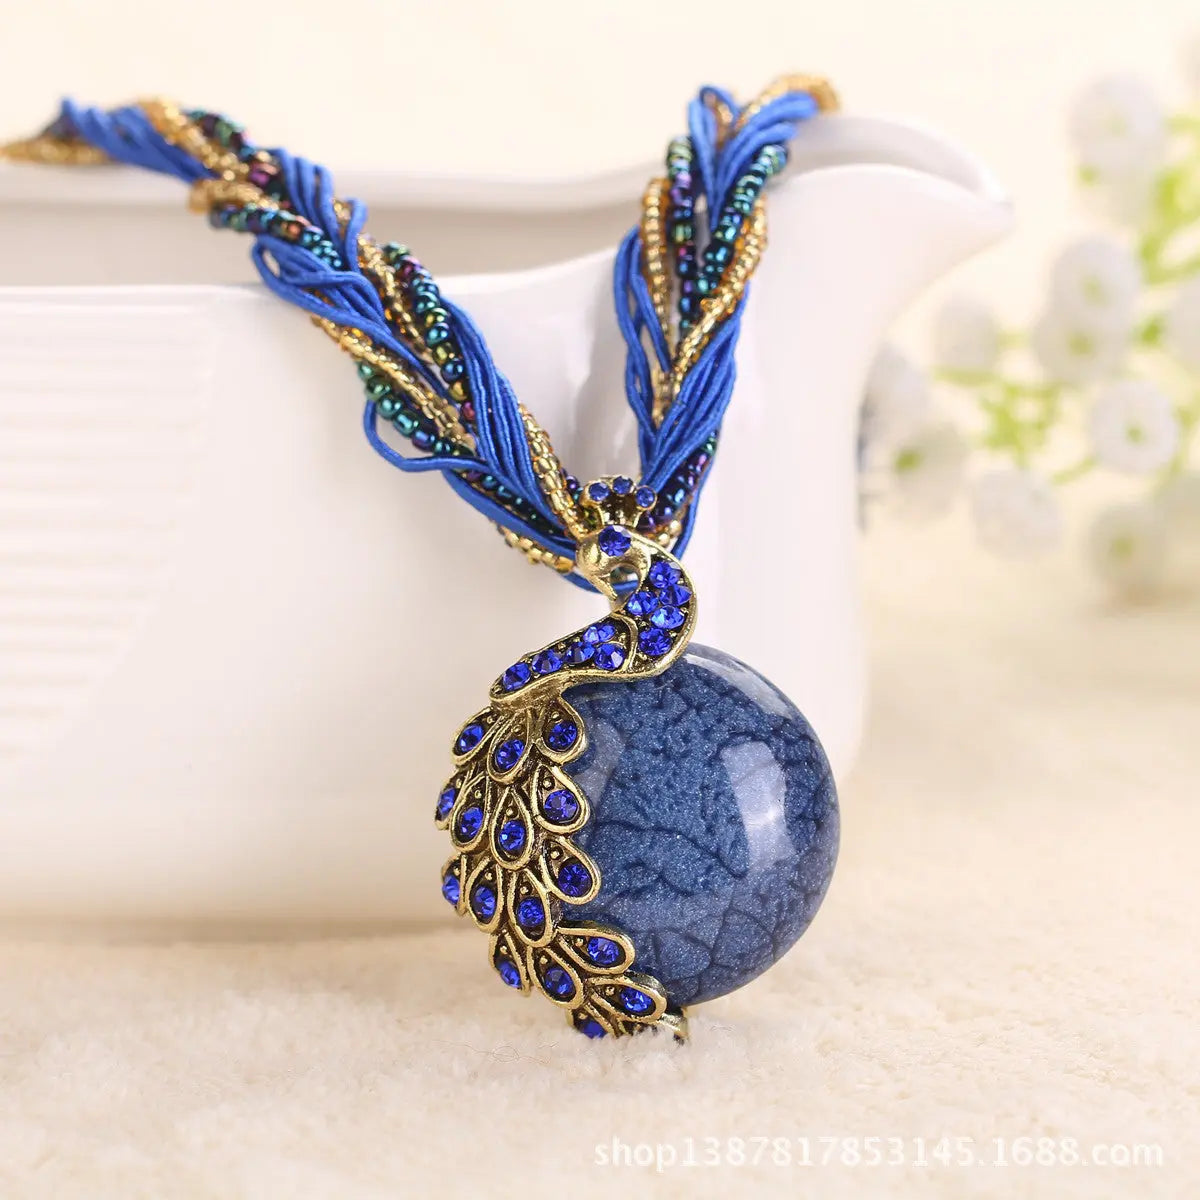 Boho Ethnic Jewelry Choker Handmade Pendant Necklace Natural Stone Bead Peacock Statement Maxi Necklace for Women Girls Gifts - Trending's Arena Beauty Boho Ethnic Jewelry Choker Handmade Pendant Necklace Natural Stone Bead Peacock Statement Maxi Necklace for Women Girls Gifts Electronics Facial & Neck dark-blue